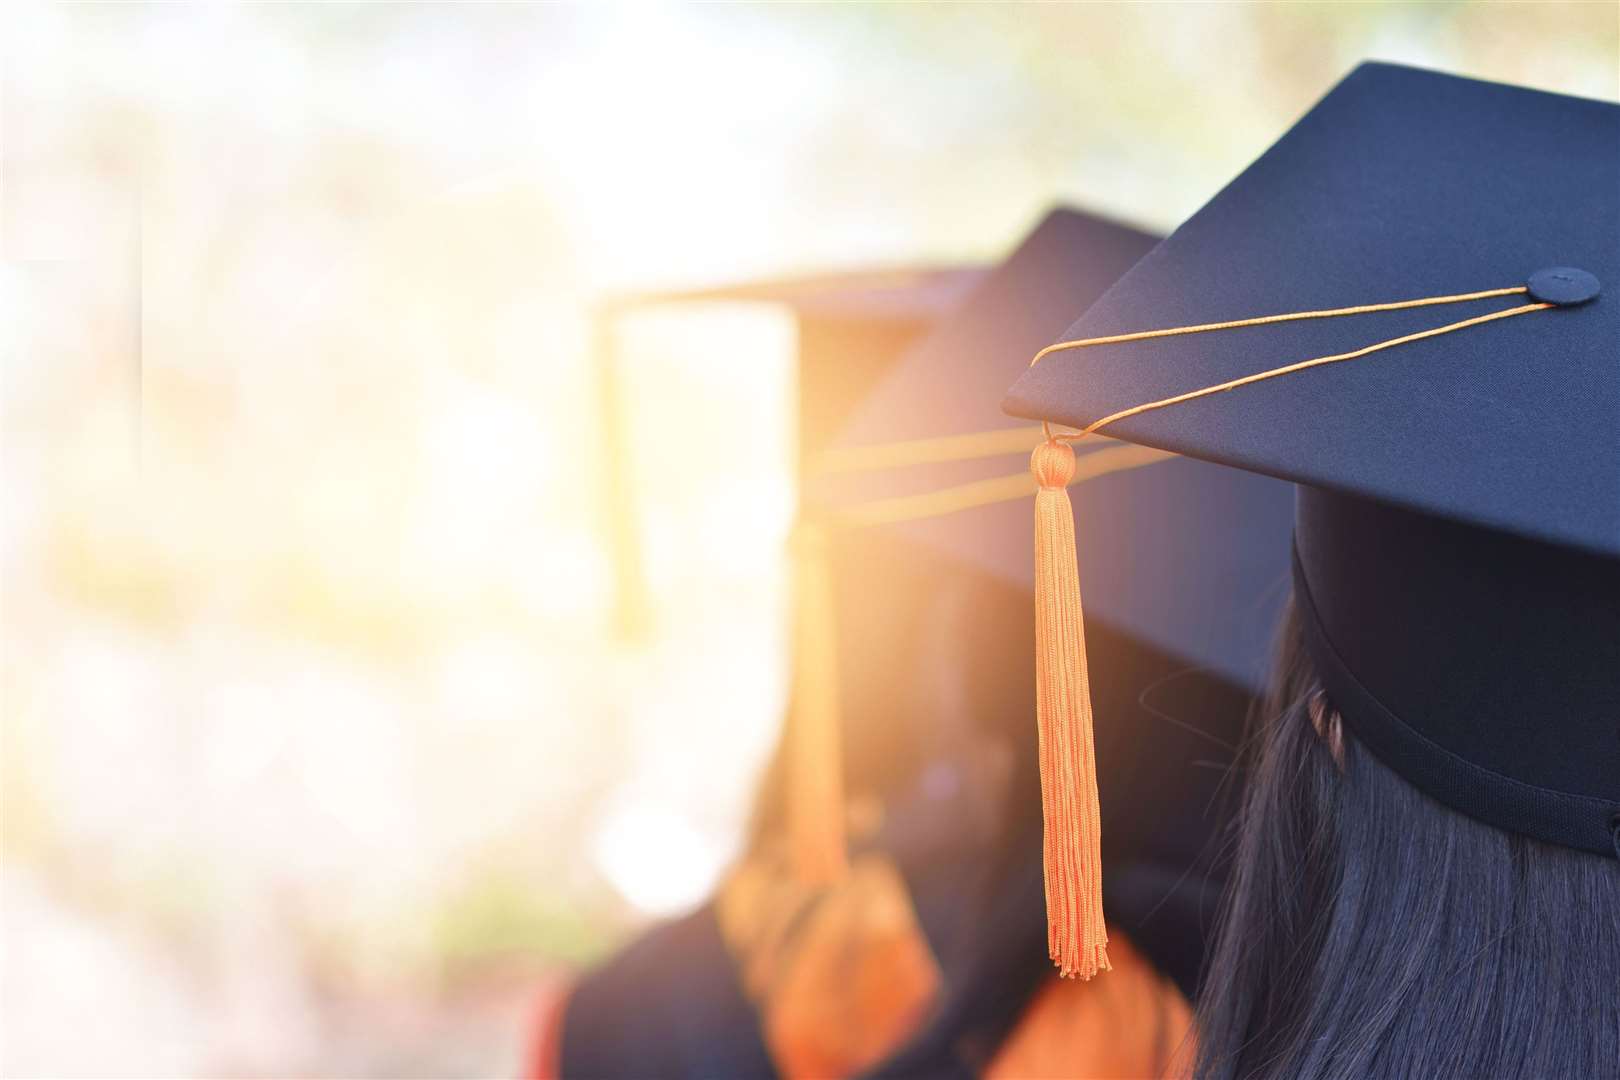 The government is proposing changes to the way graduates pay back loans. Image: Thinkstock